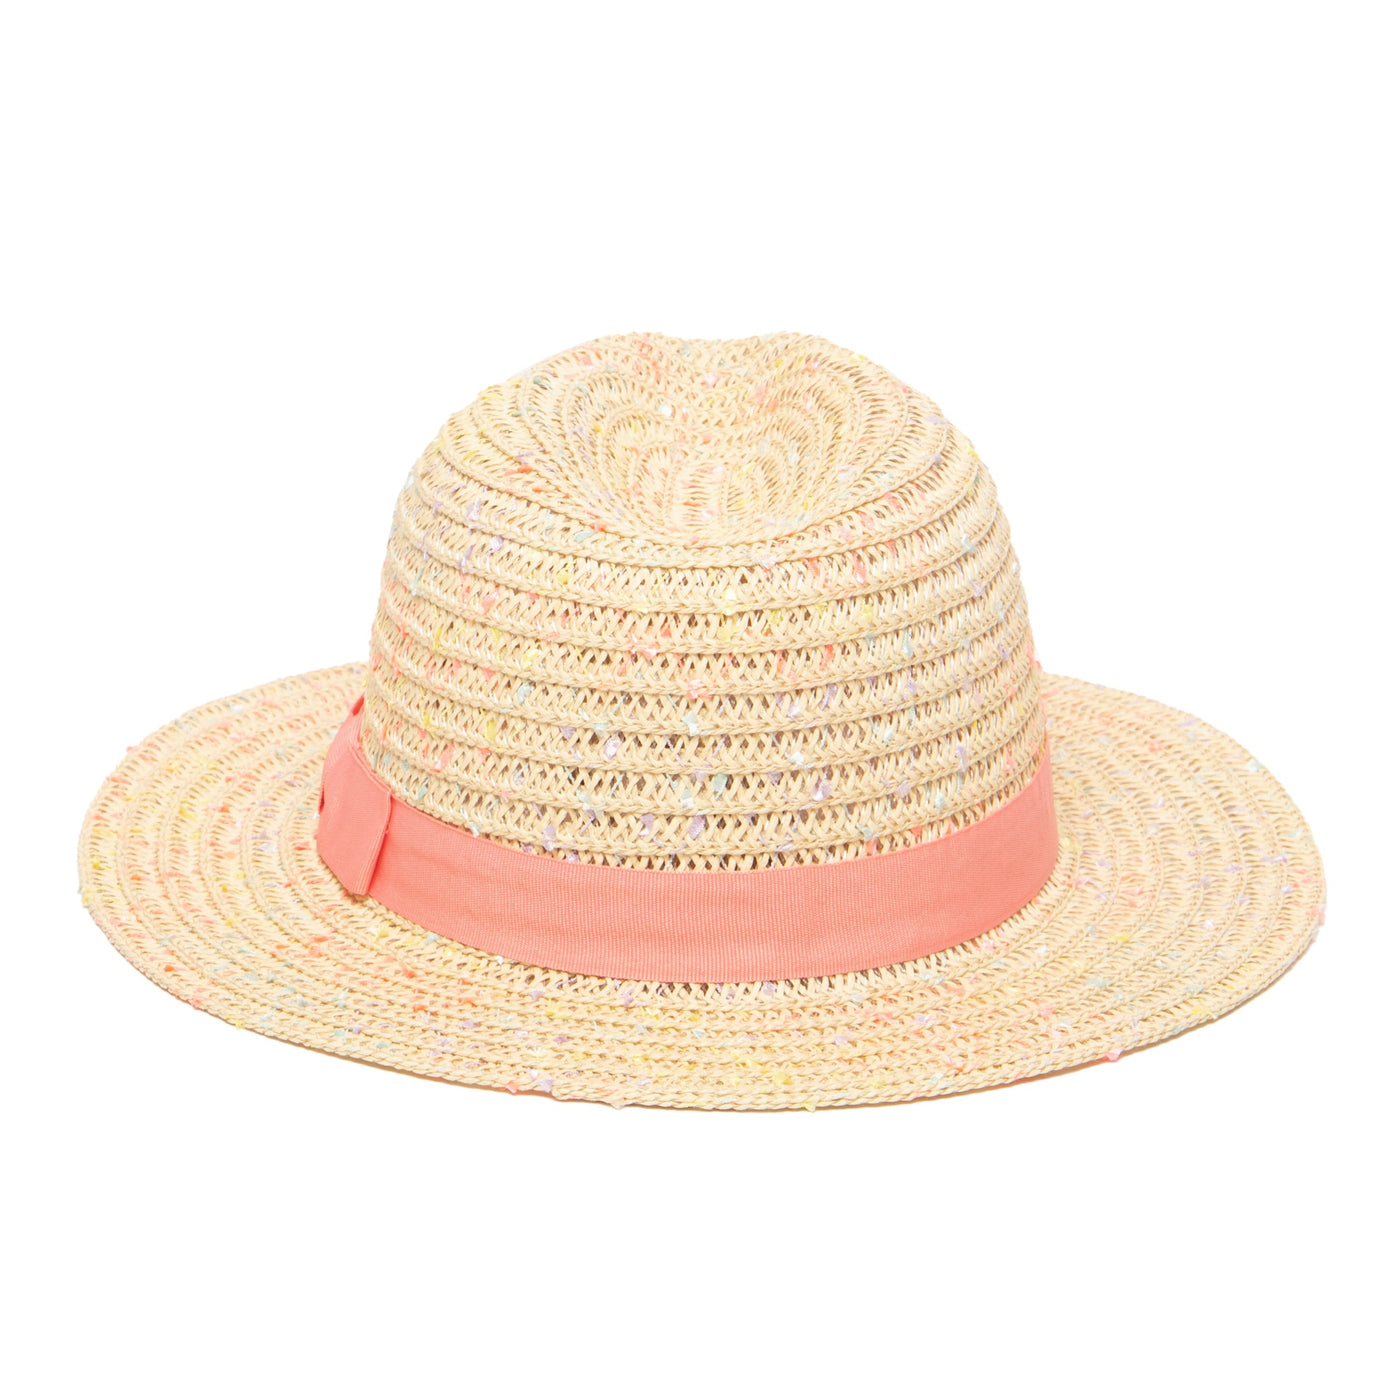 FEDORA - 5-7 Yr Kid's Paperbraid Multi-color Fedora With Blush Band/Bow